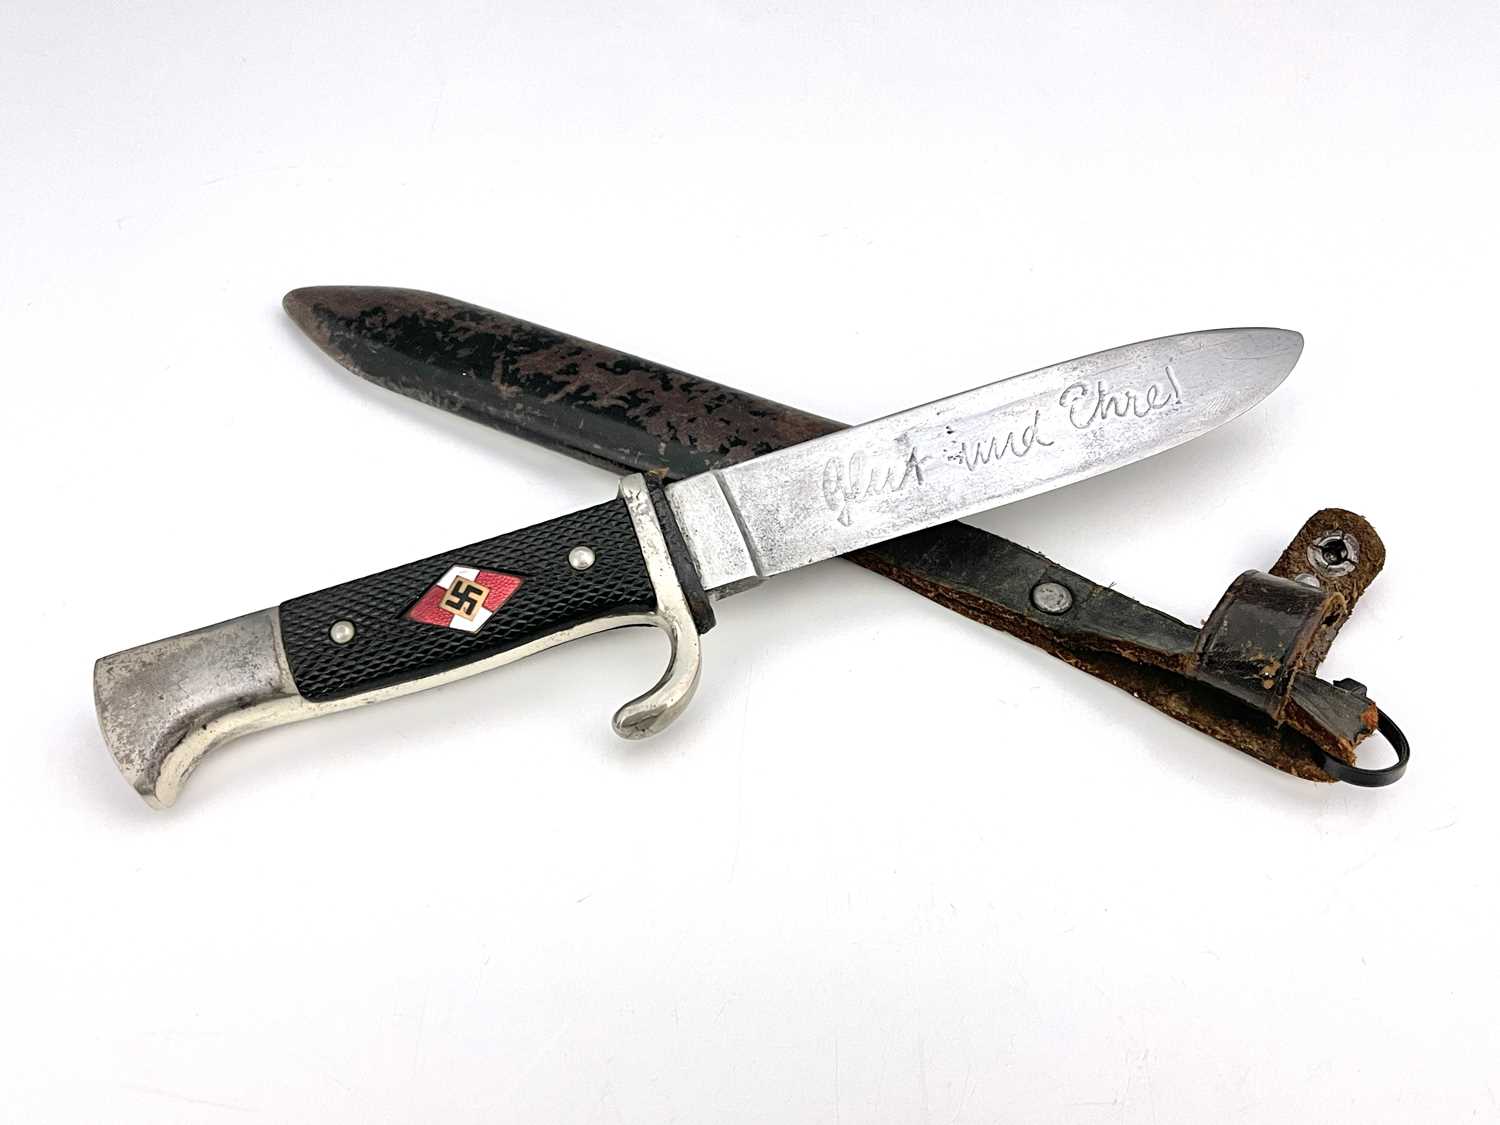 A German Third Reich Hitler Youth knife, nickel pommel and crossguard, diced grip with inset